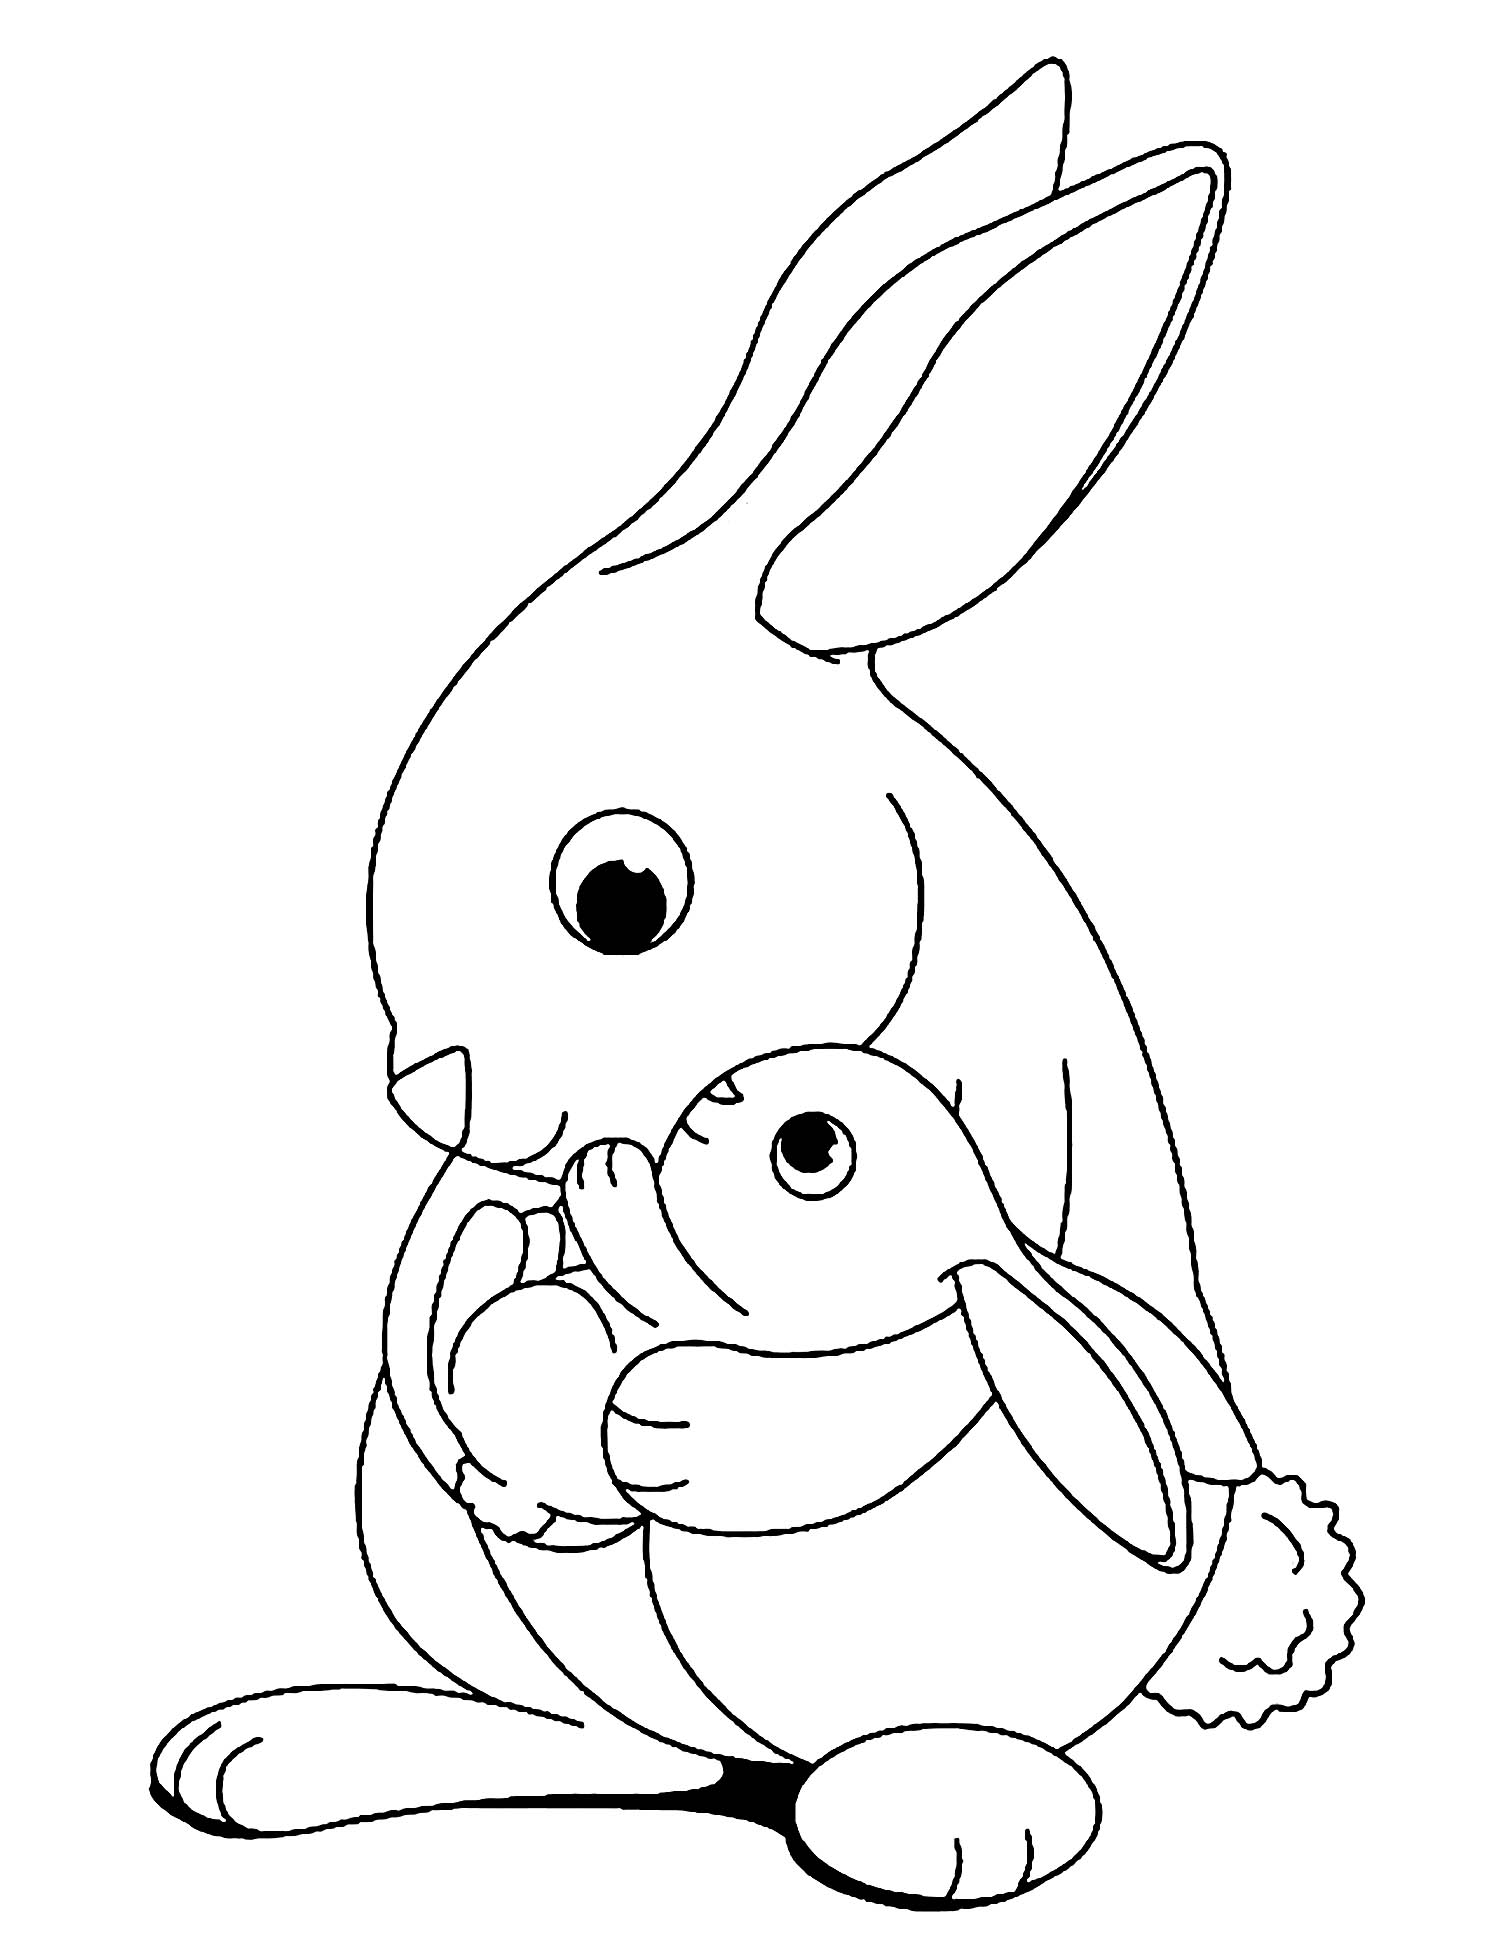 Free rabbit coloring pages to color - Rabbit Kids Coloring Pages